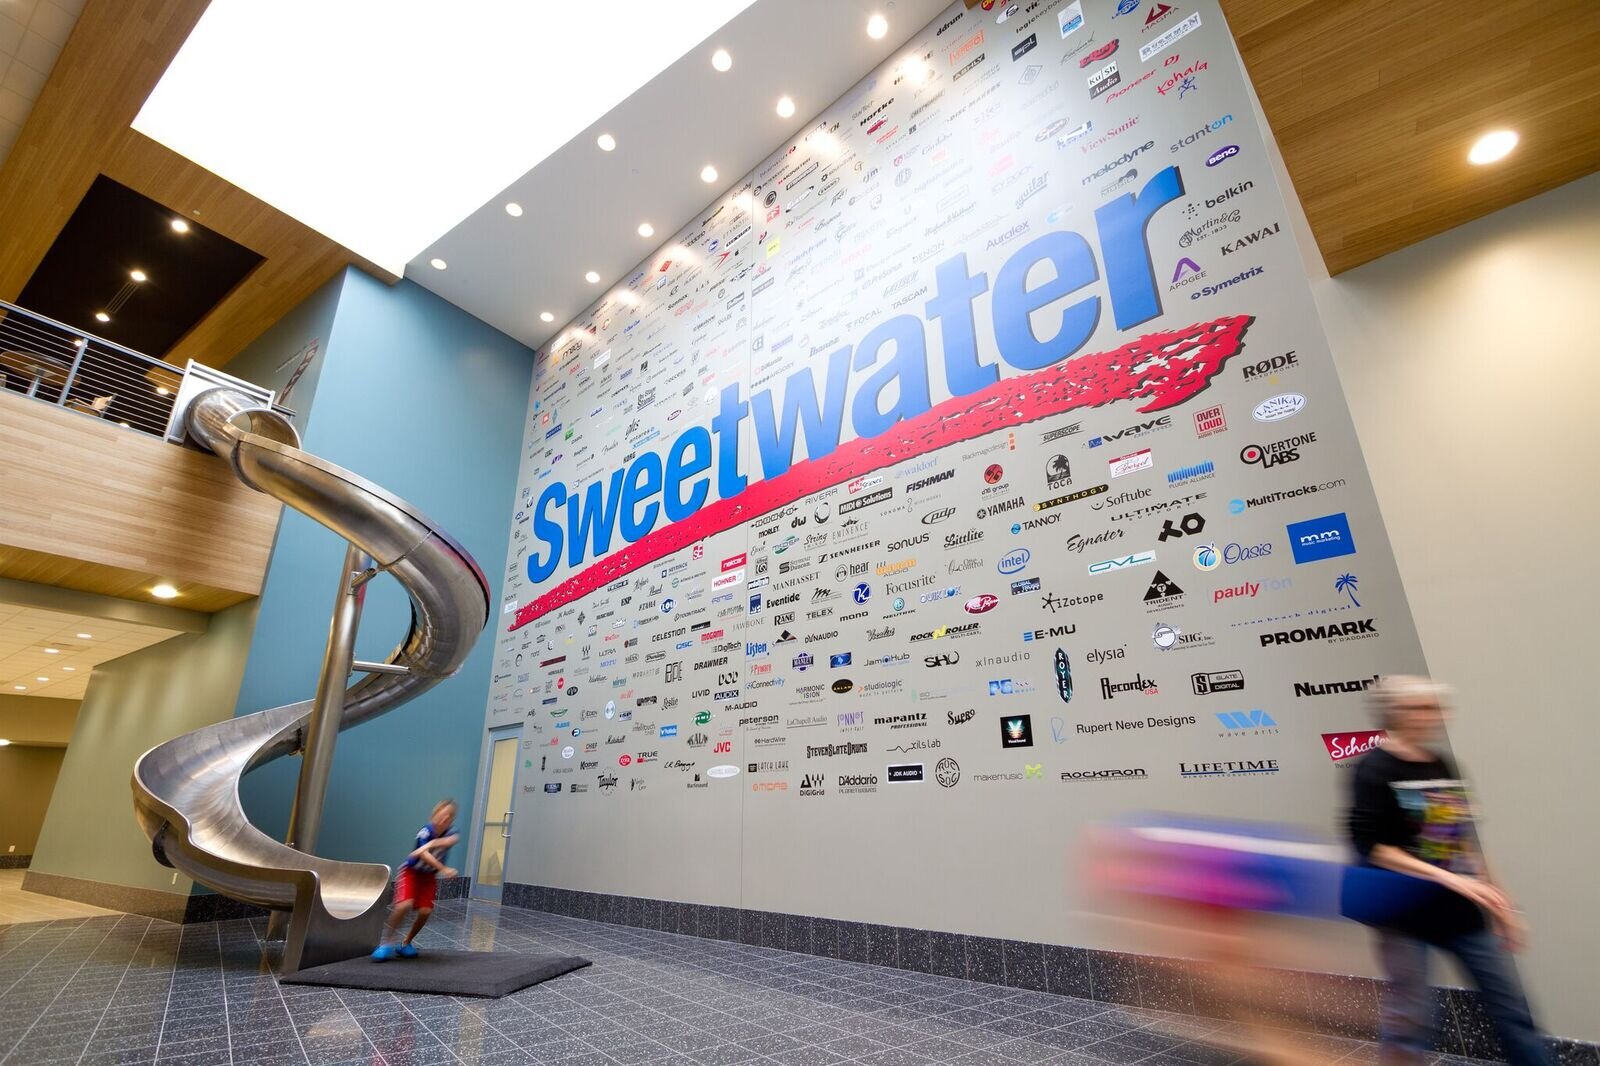 Sweetwater's campus is known around town for its in-house slide.